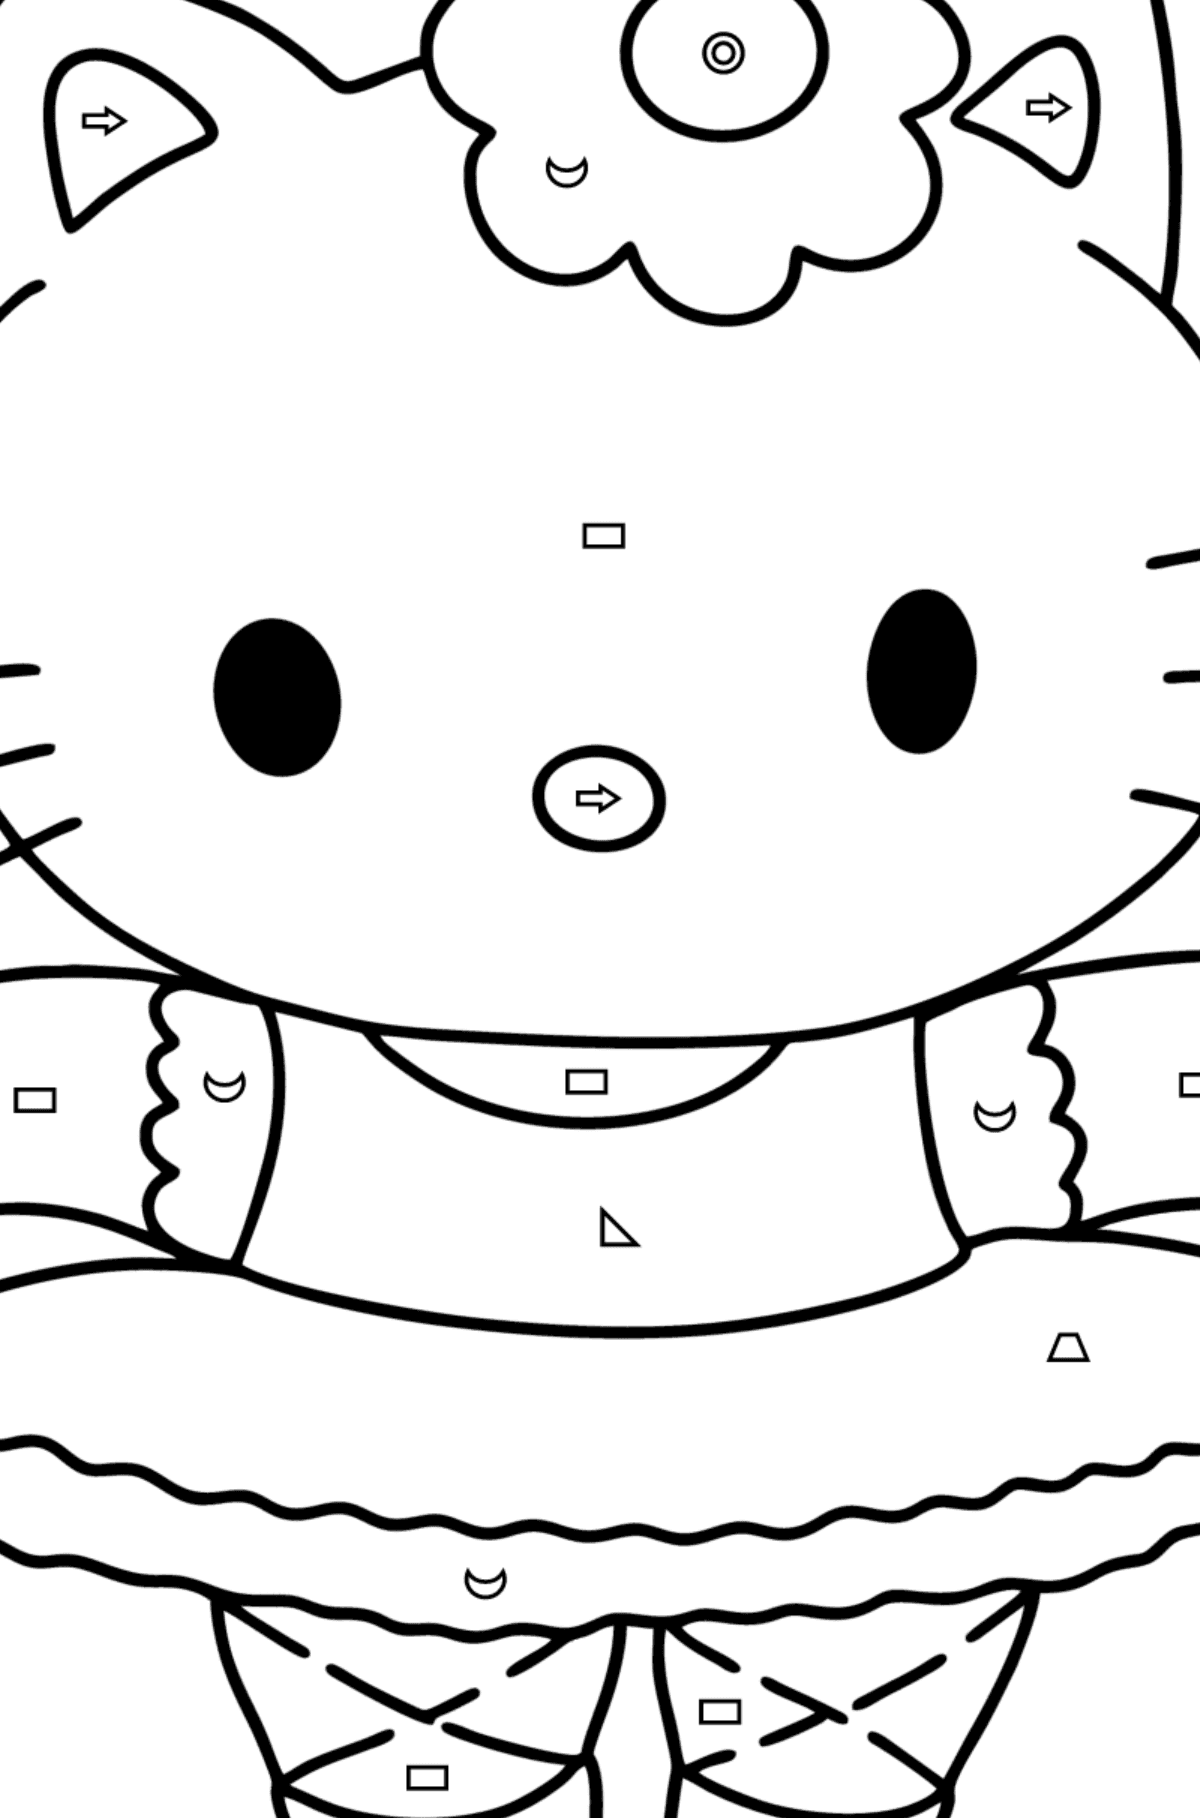 Hello Kitty Ballerina coloring page - Coloring by Geometric Shapes for Kids